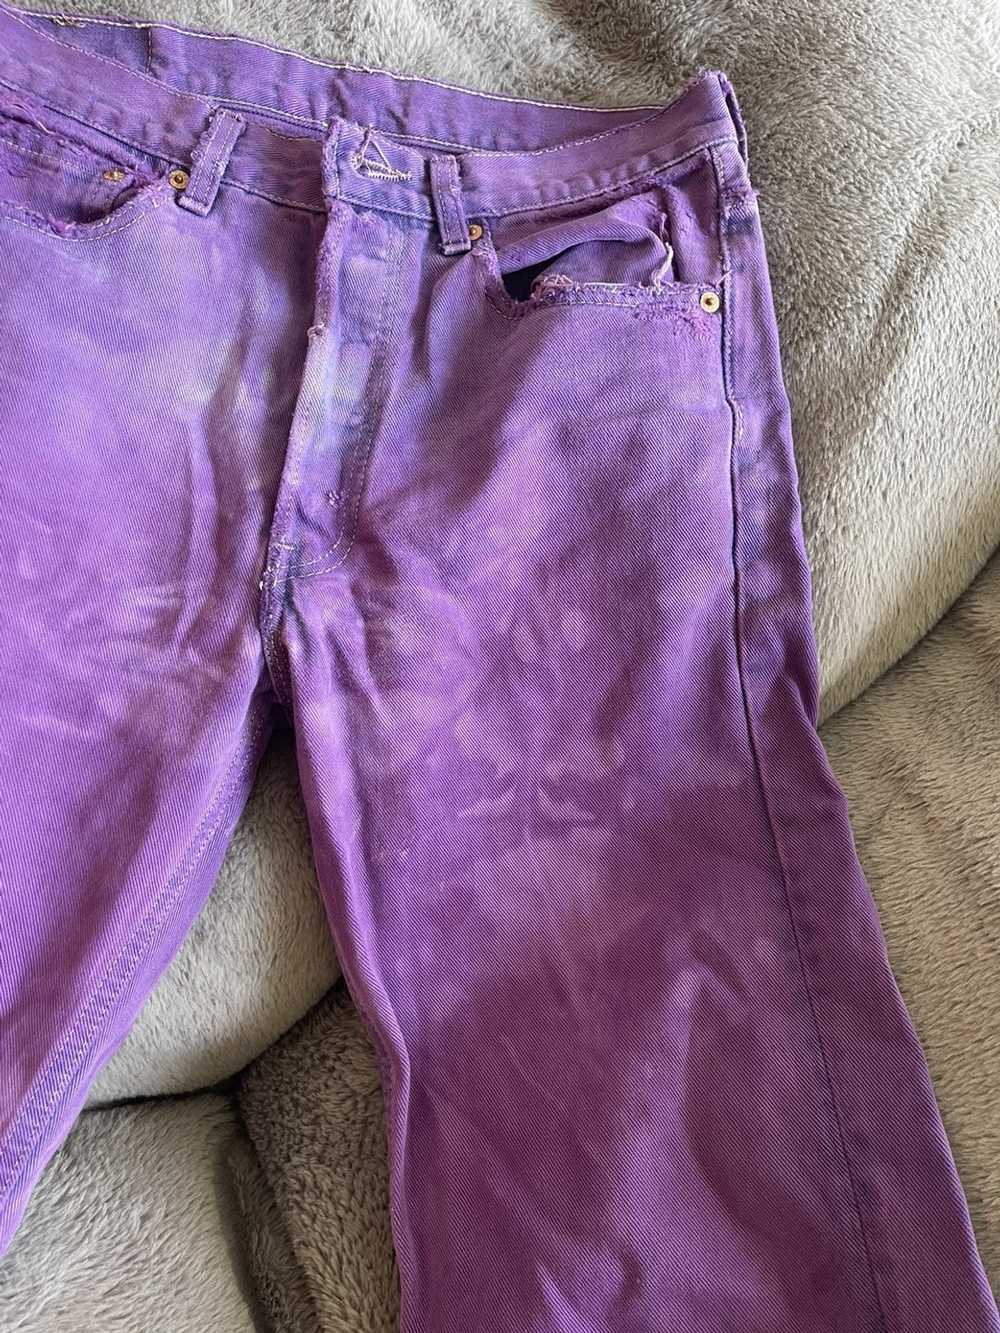 Lee Dyed over Lee Jeans - image 5